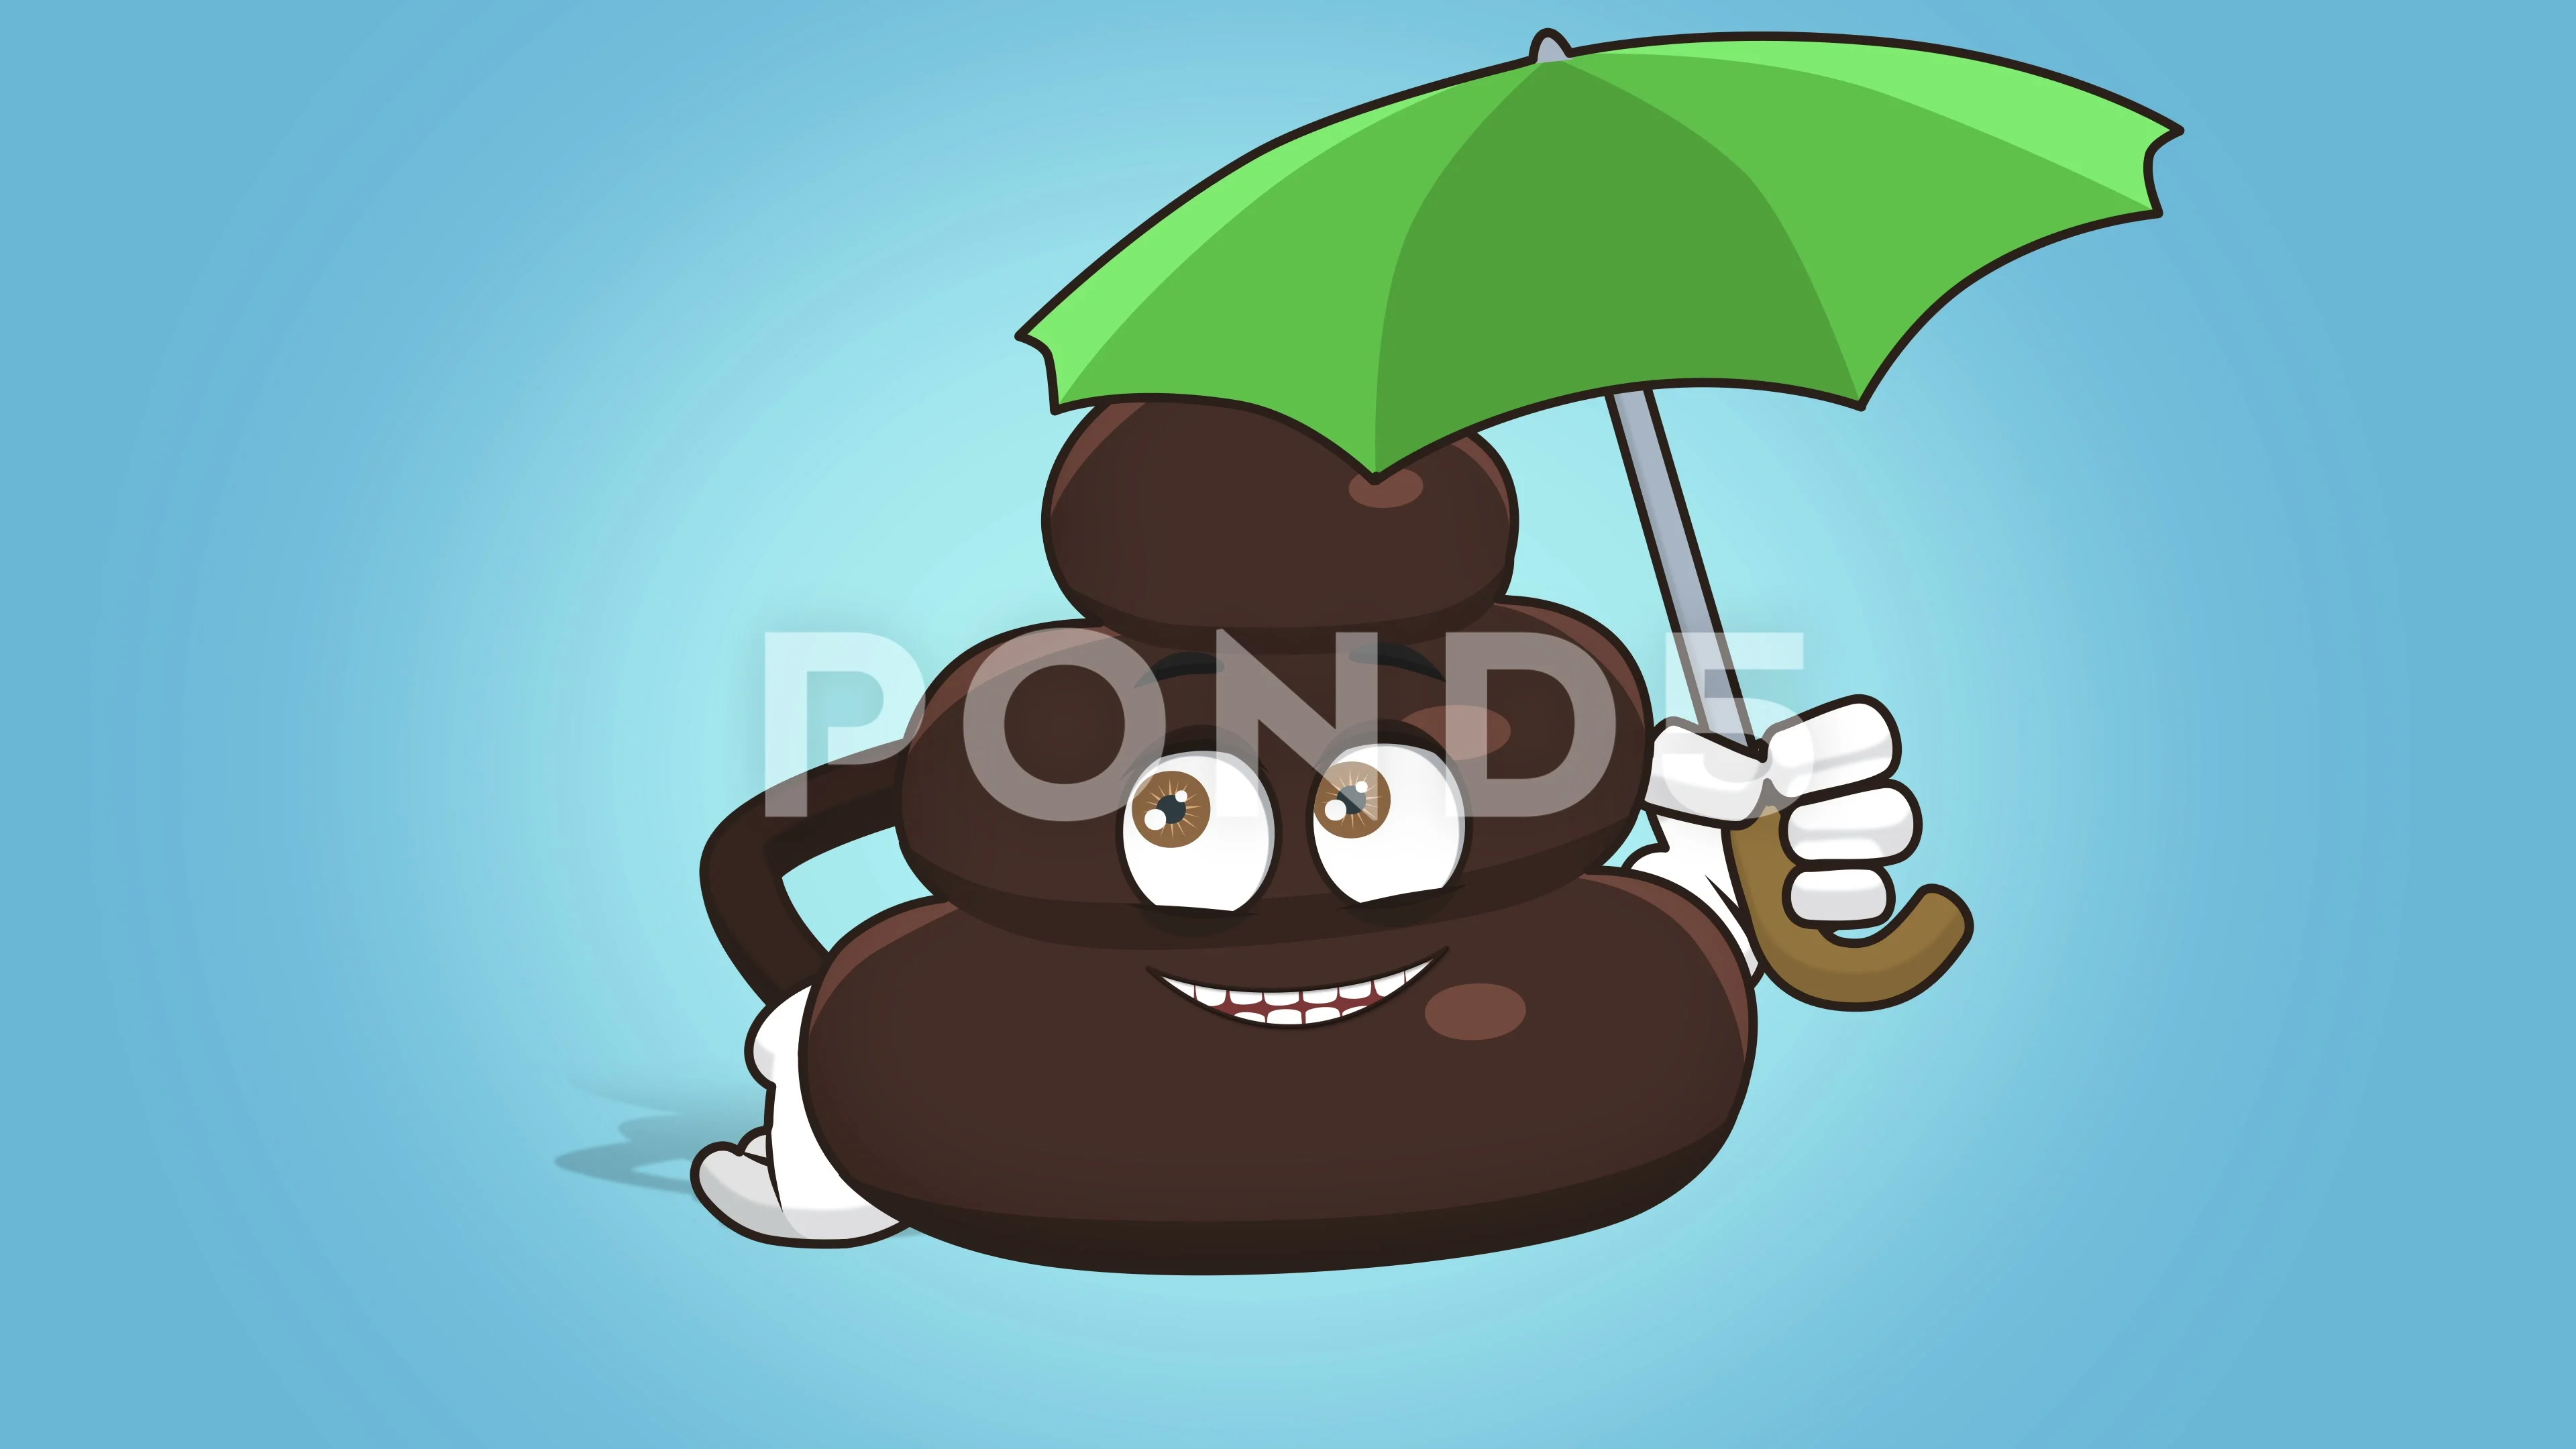 Poop Monster Cartoon Character With A Grotesque Melting Face Royalty Free  SVG, Cliparts, Vectors, and Stock Illustration. Image 109587467.